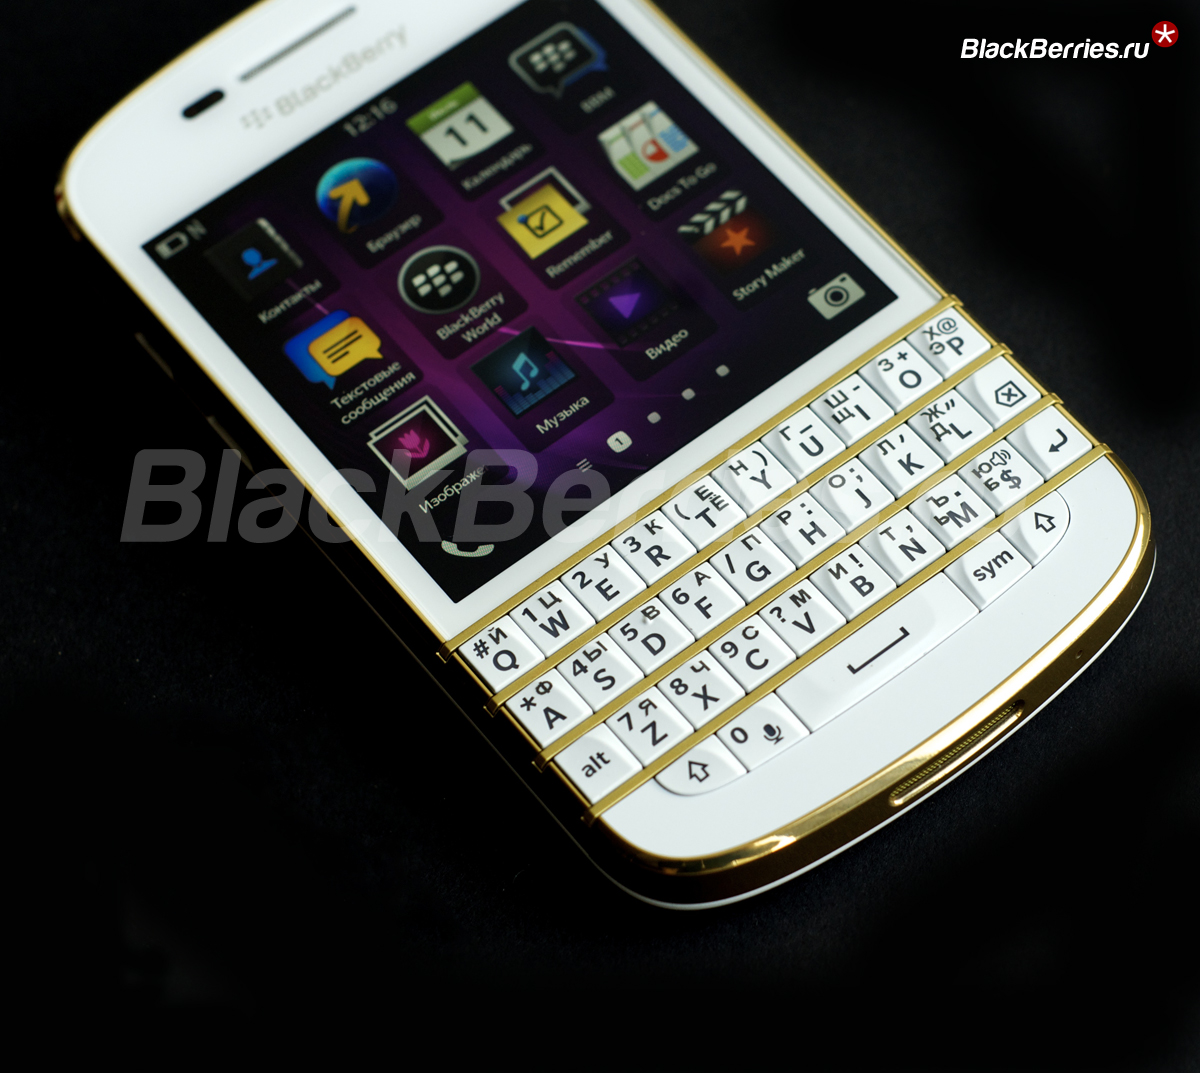 BlackBerry-Q10-Special-Edition-100